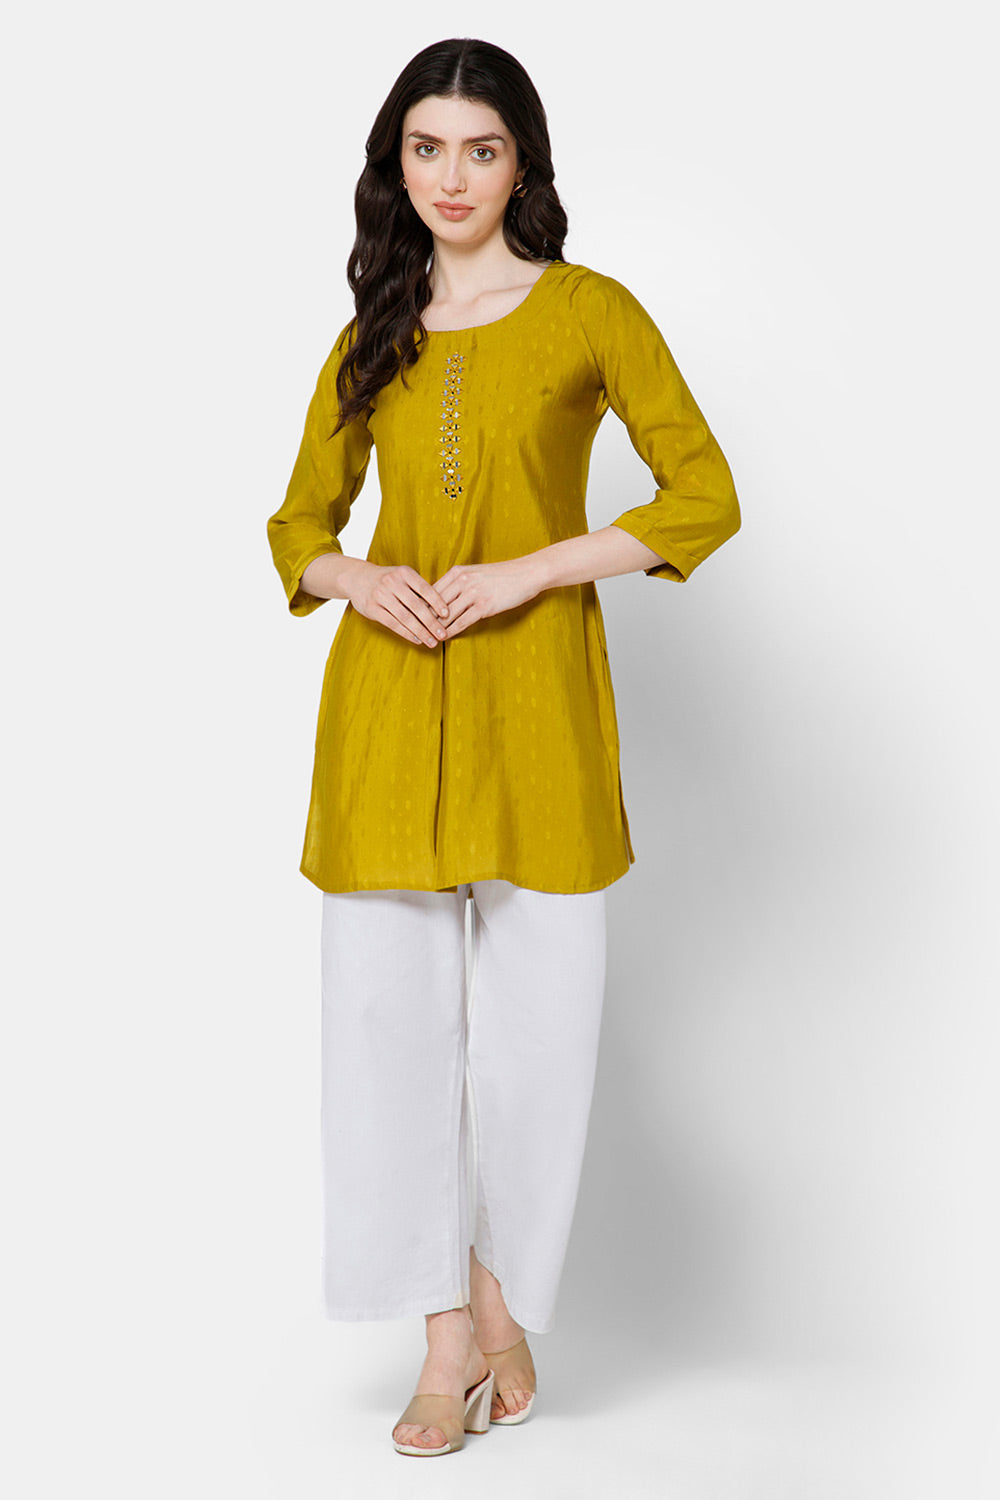 Mythri Women's Casual Tops with Mirror Work At The Center Front  - Yellow - E024